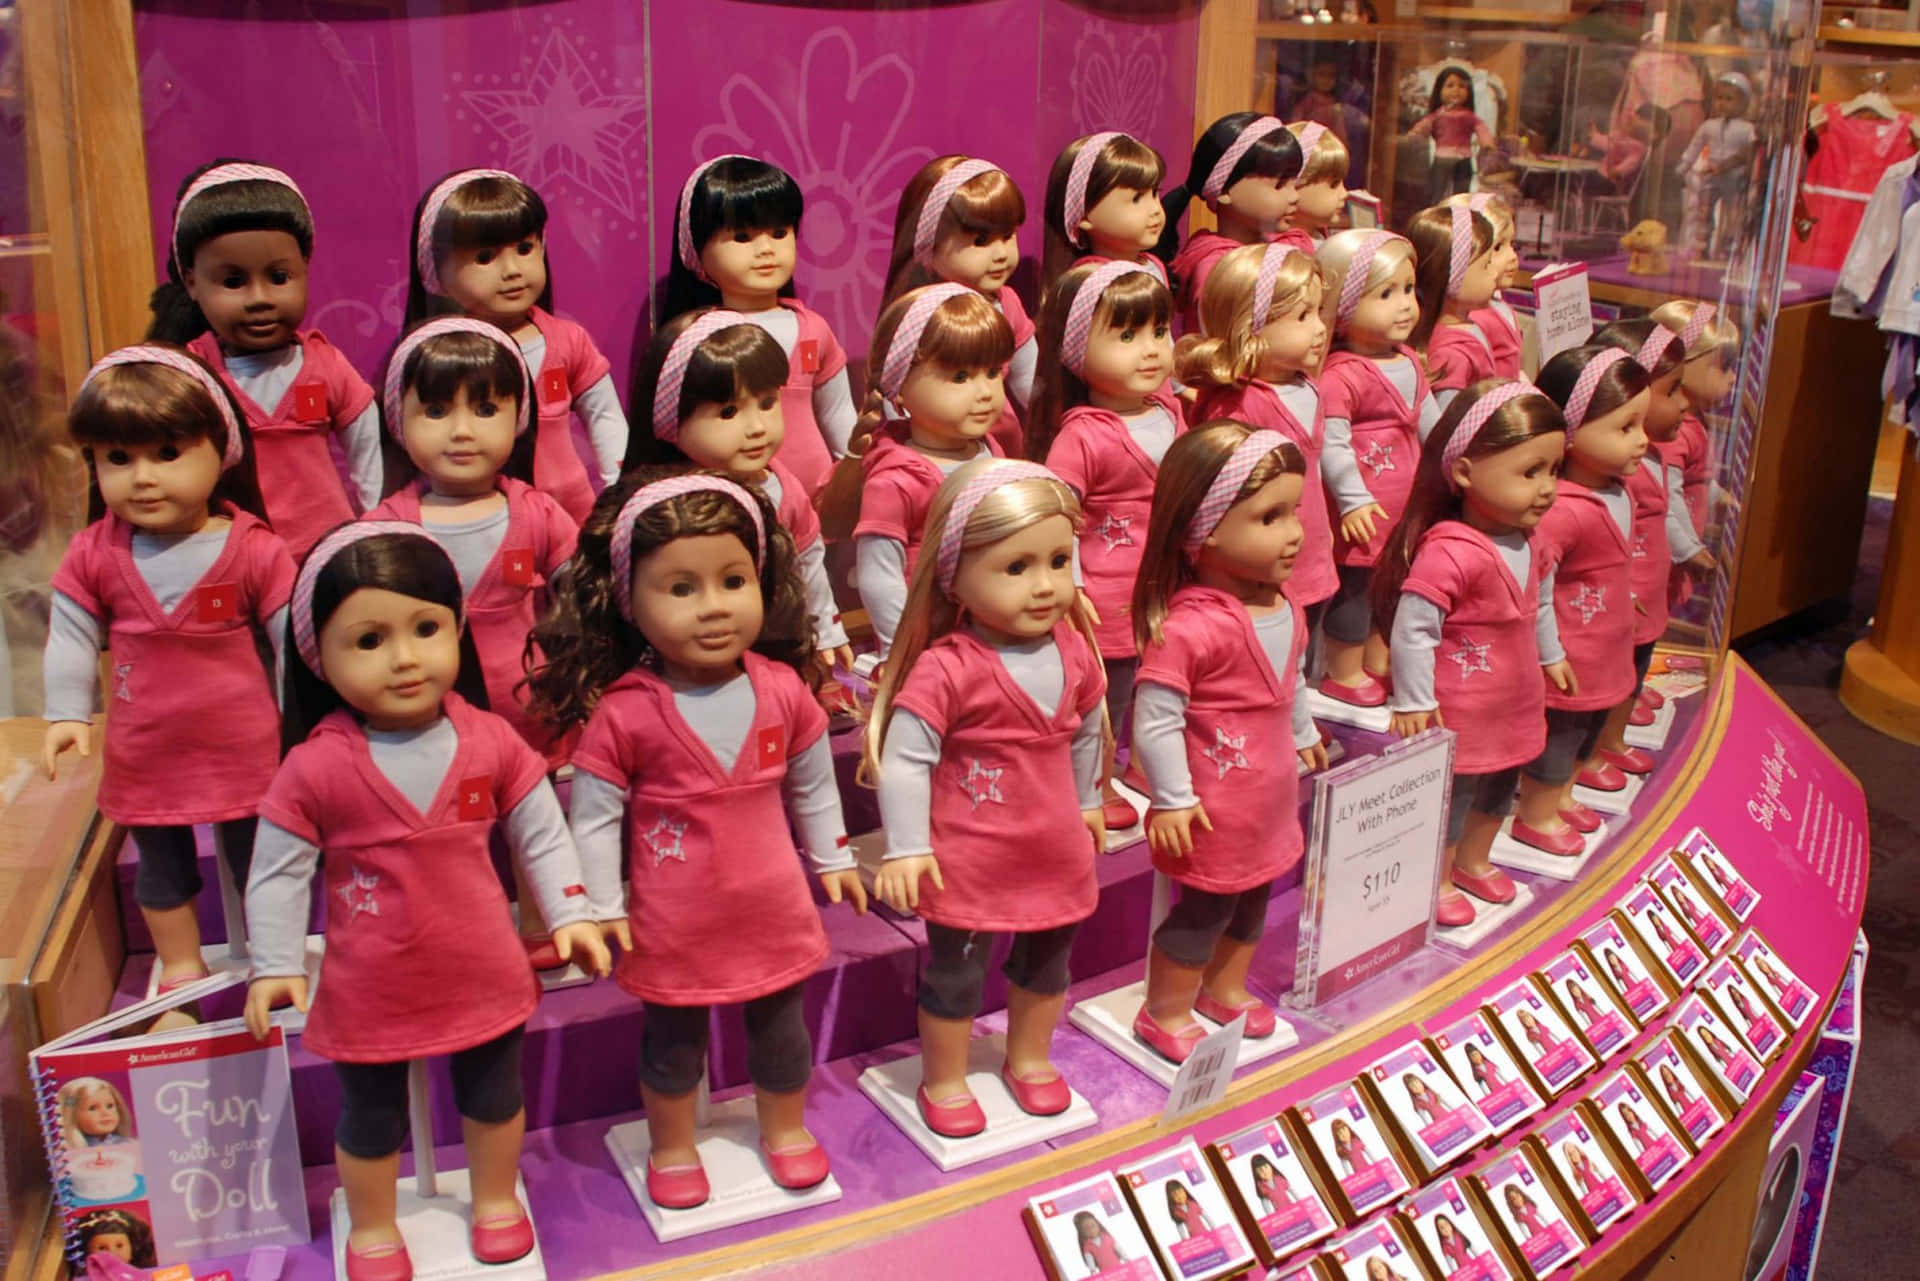 A Display Of American Girl Dolls In Pink